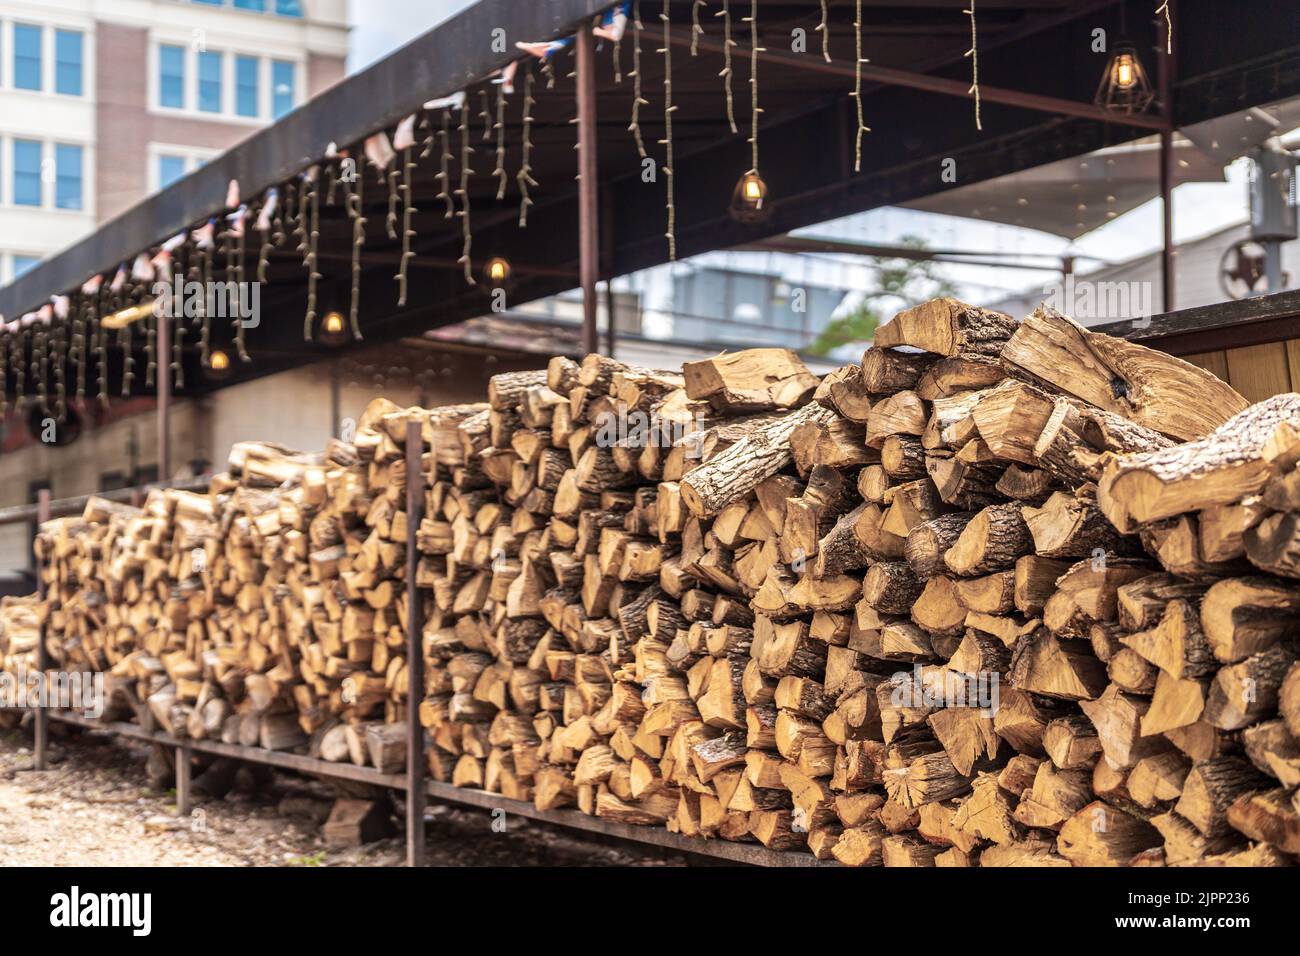 A Stack of Firewood in Houston Texas. Stock Photo